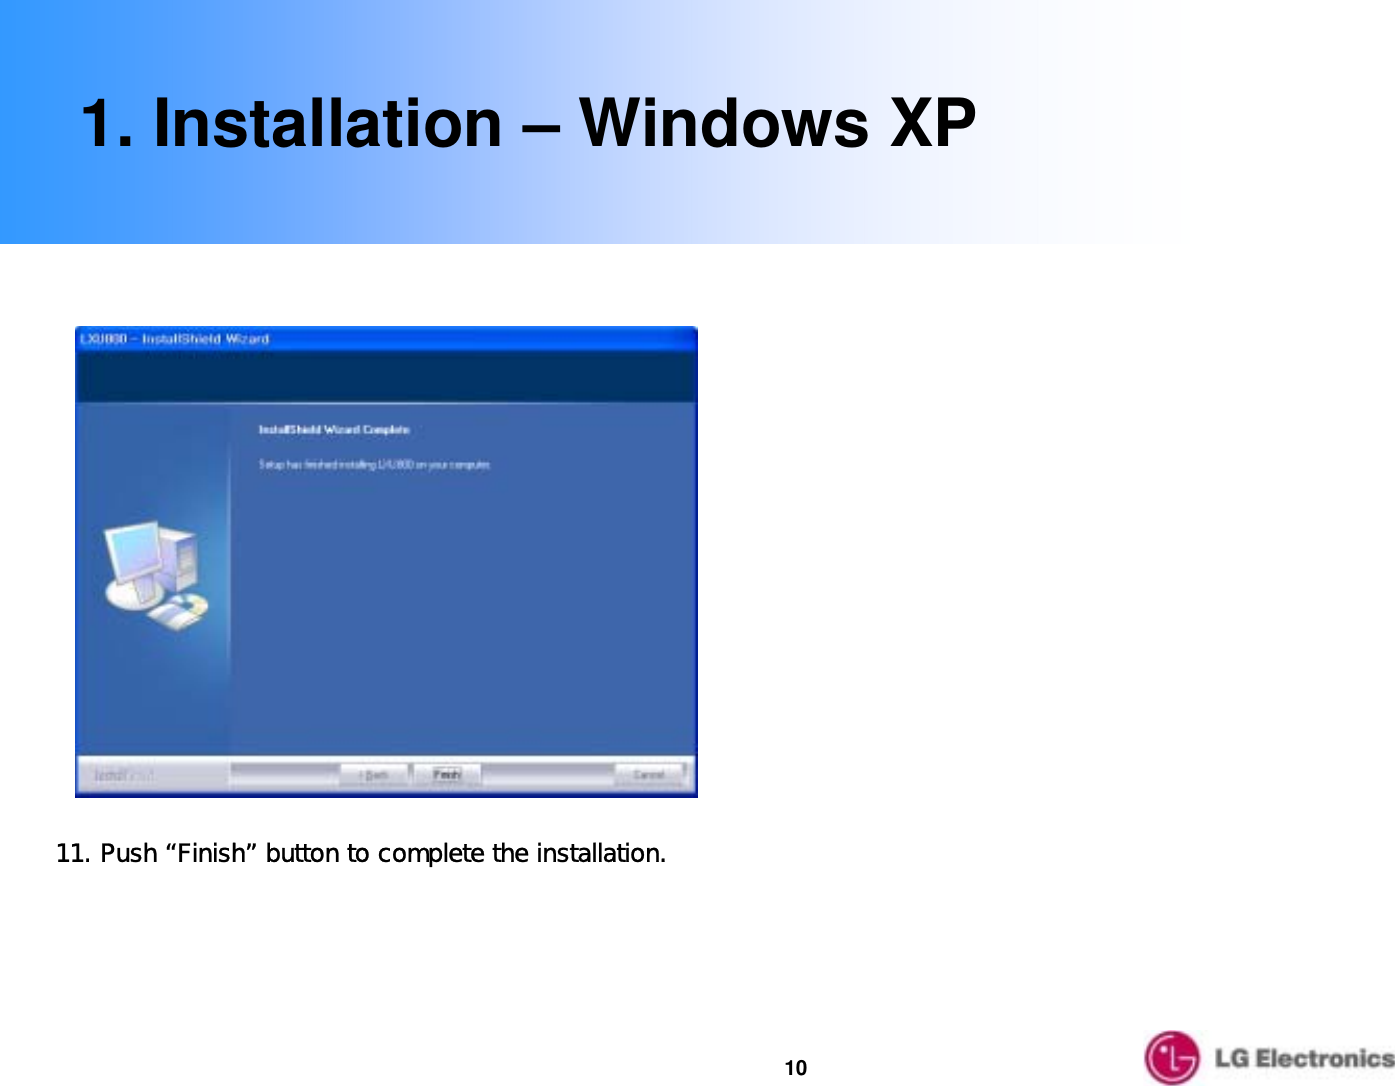 1011. Push “Finish” button to complete the installation.1. Installation – Windows XP